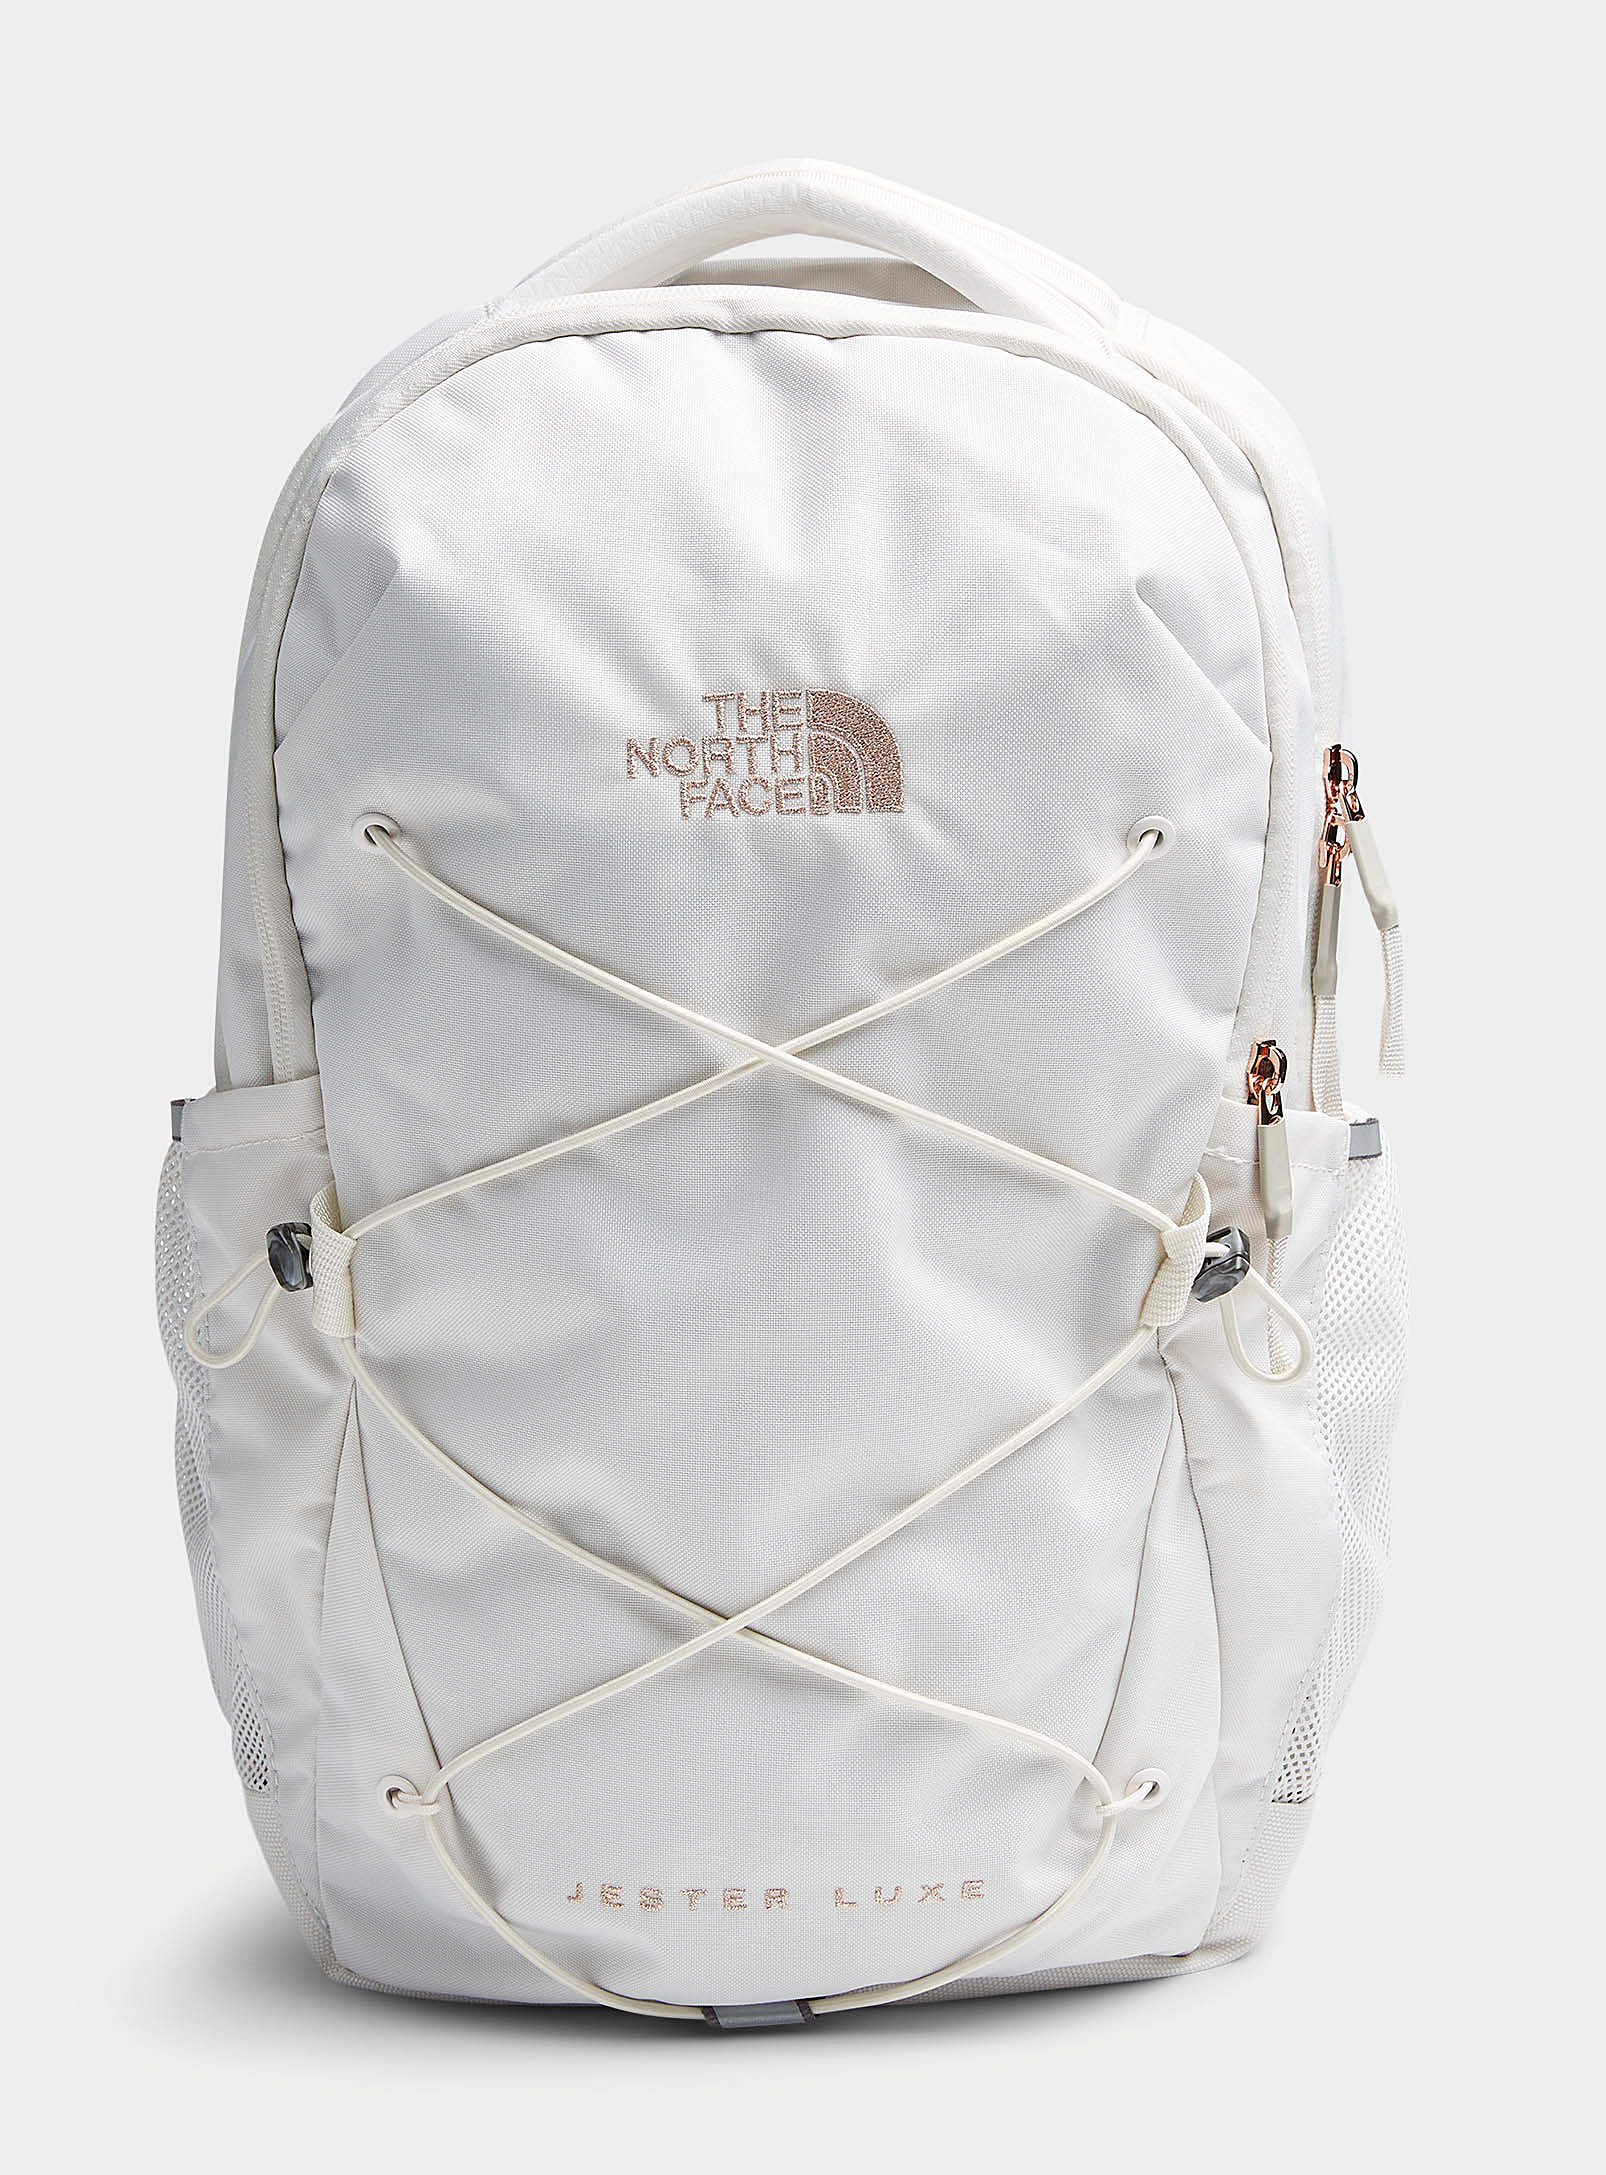 The North Face Jester Luxe Backpack In White